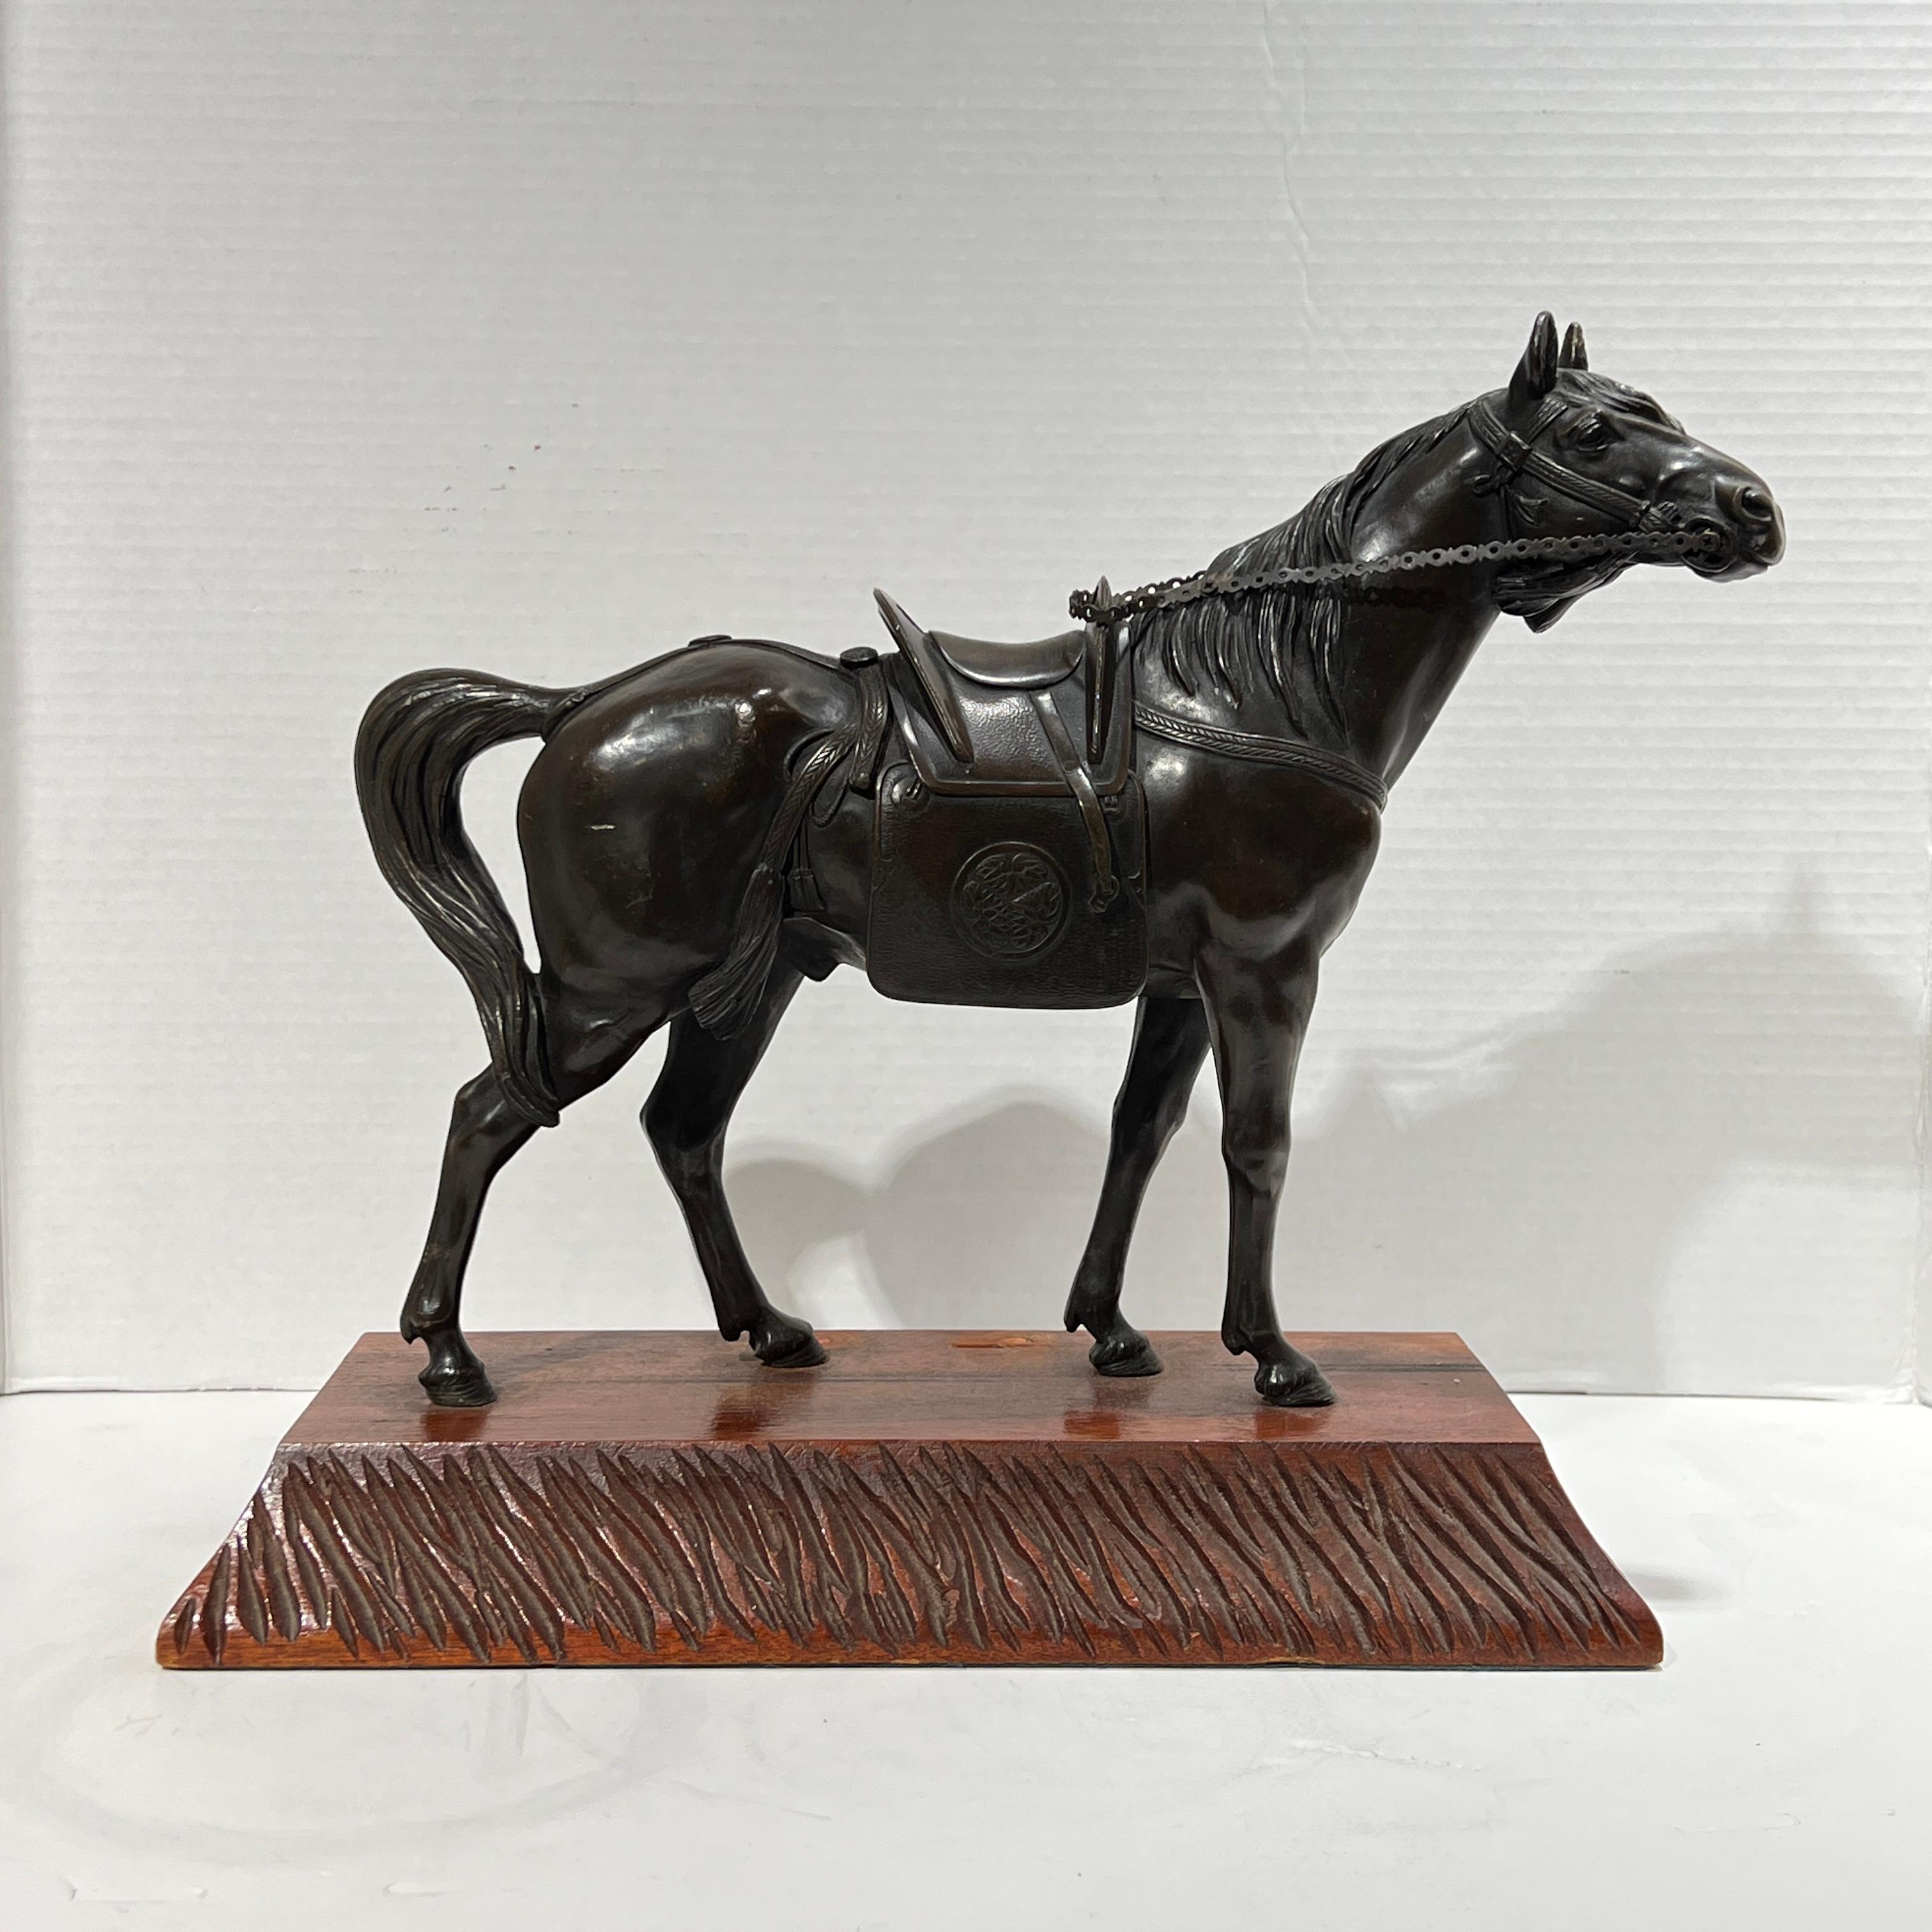 19th Century Japanese Bronze Horse Sculpture In Good Condition For Sale In New York, NY